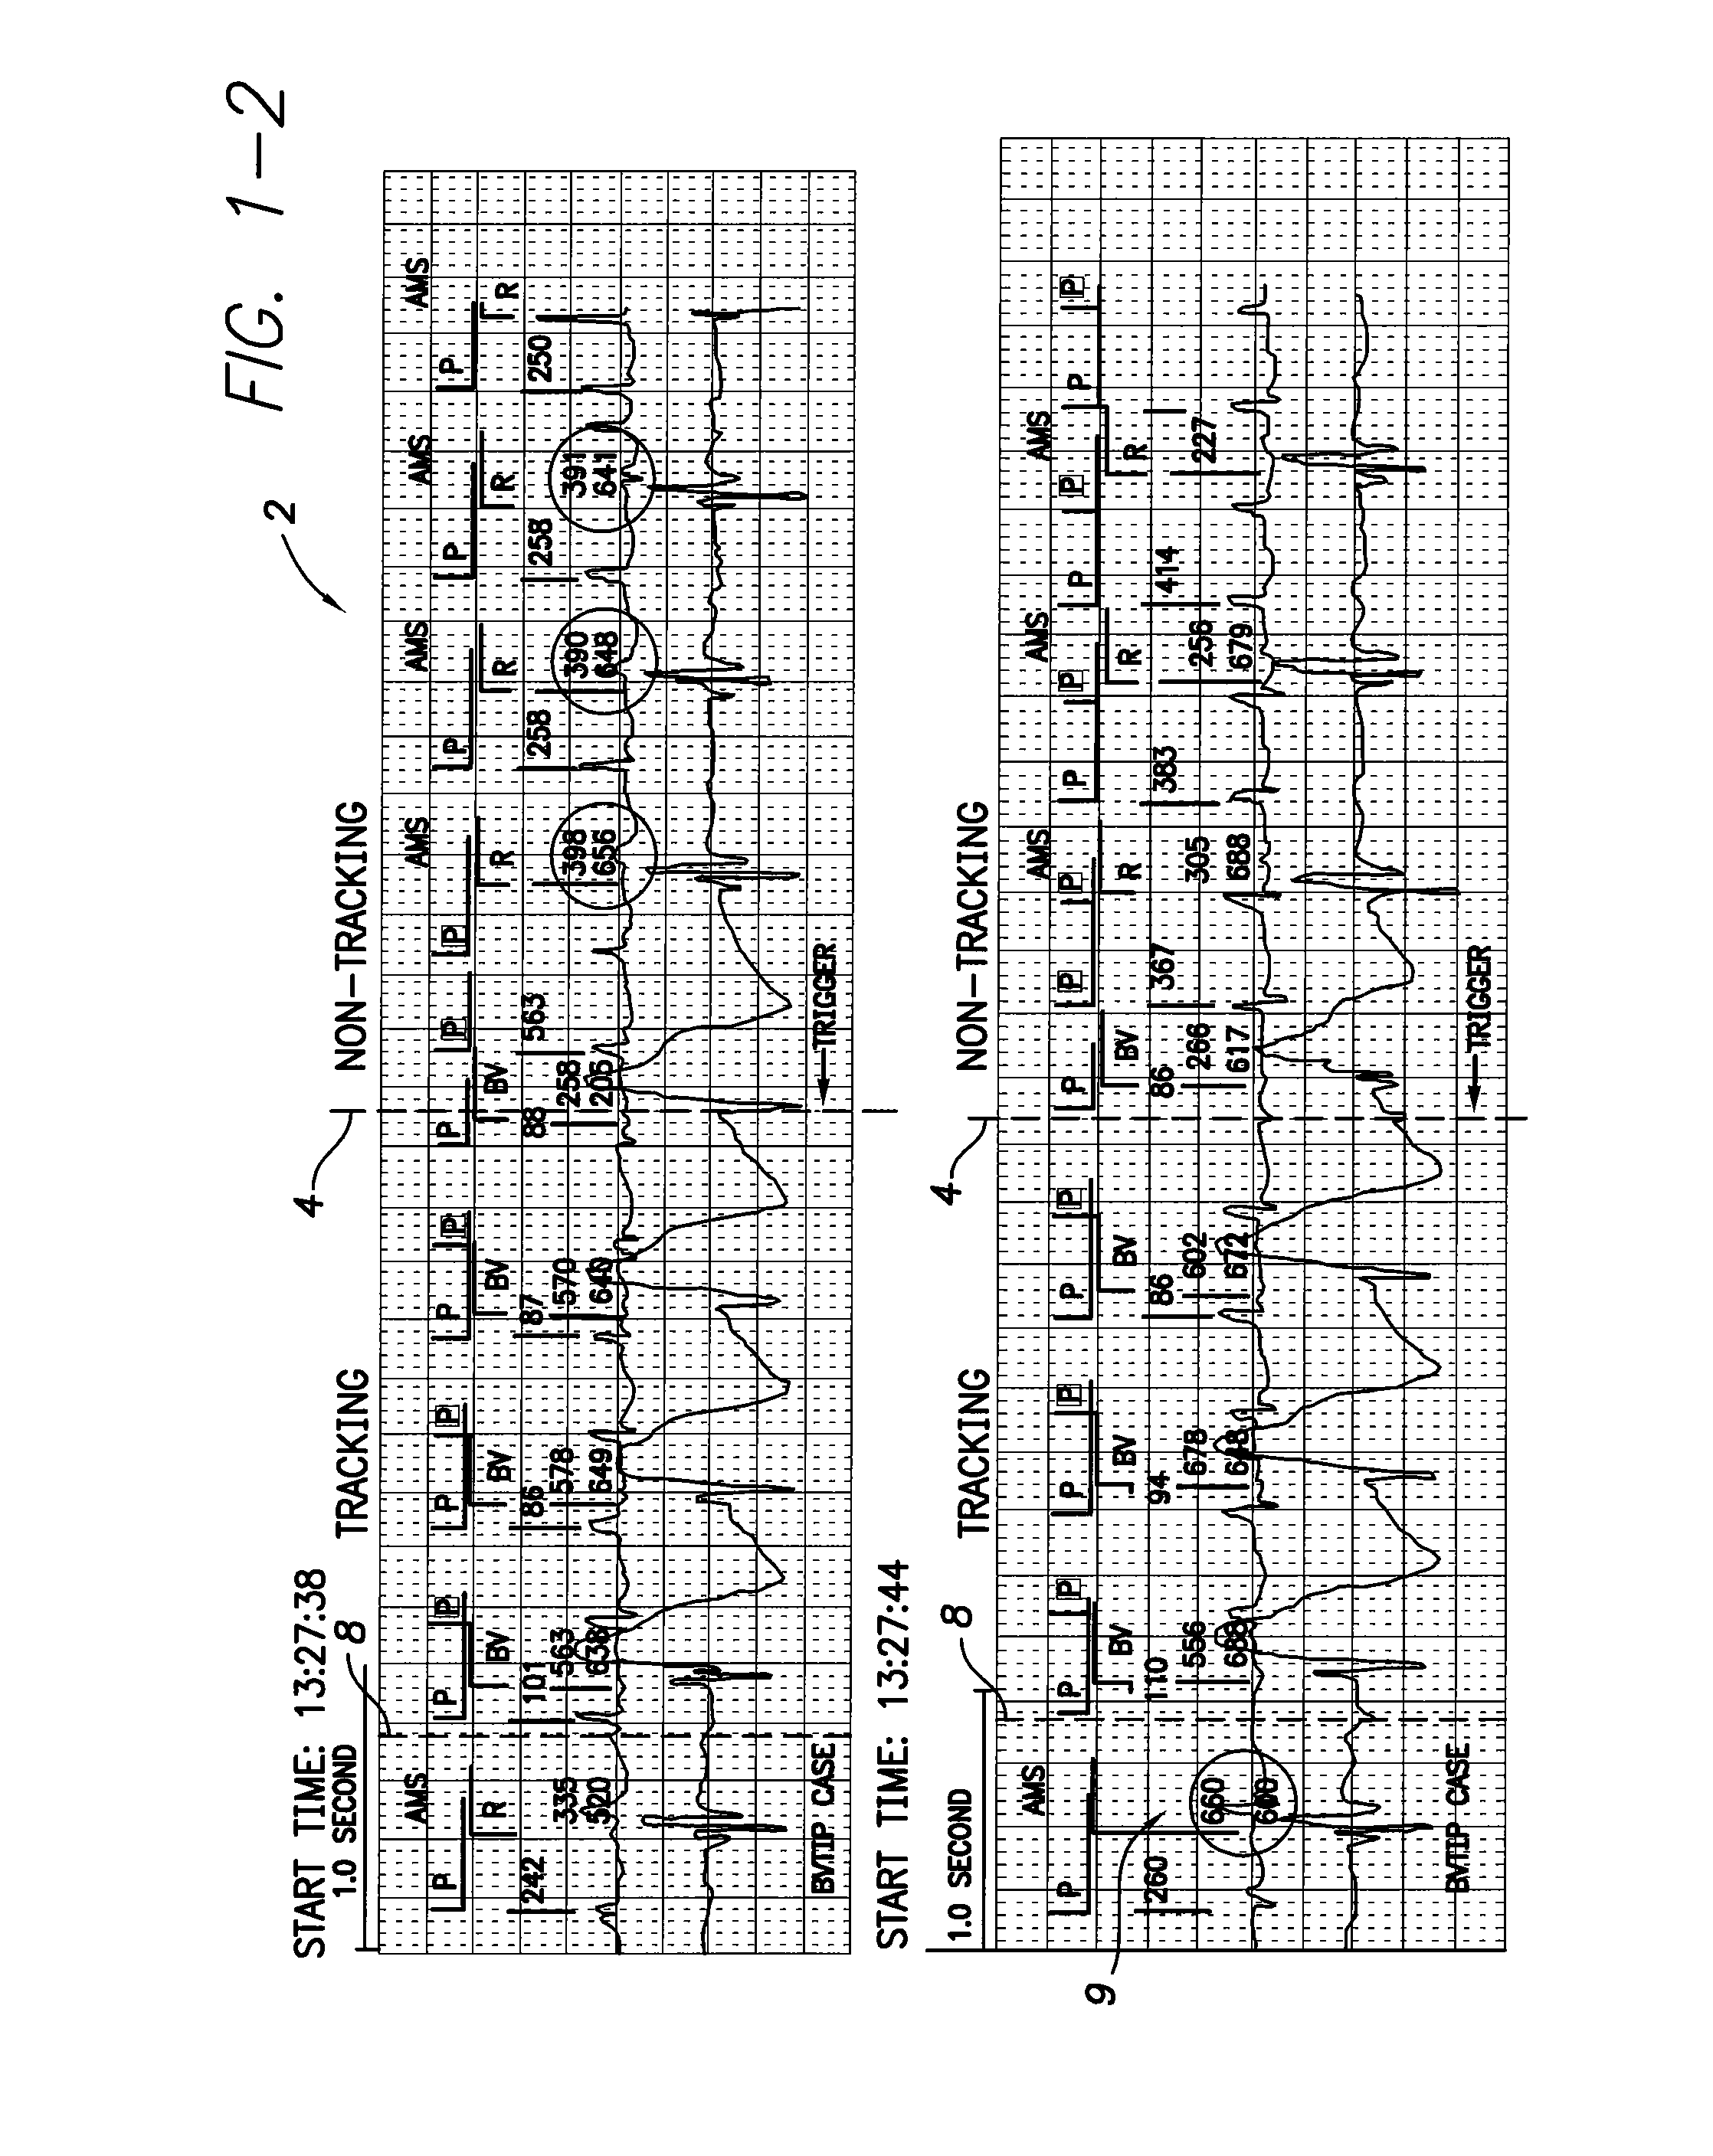 System and method for detecting hidden atrial events for use with automatic mode switching within an implantable medical device